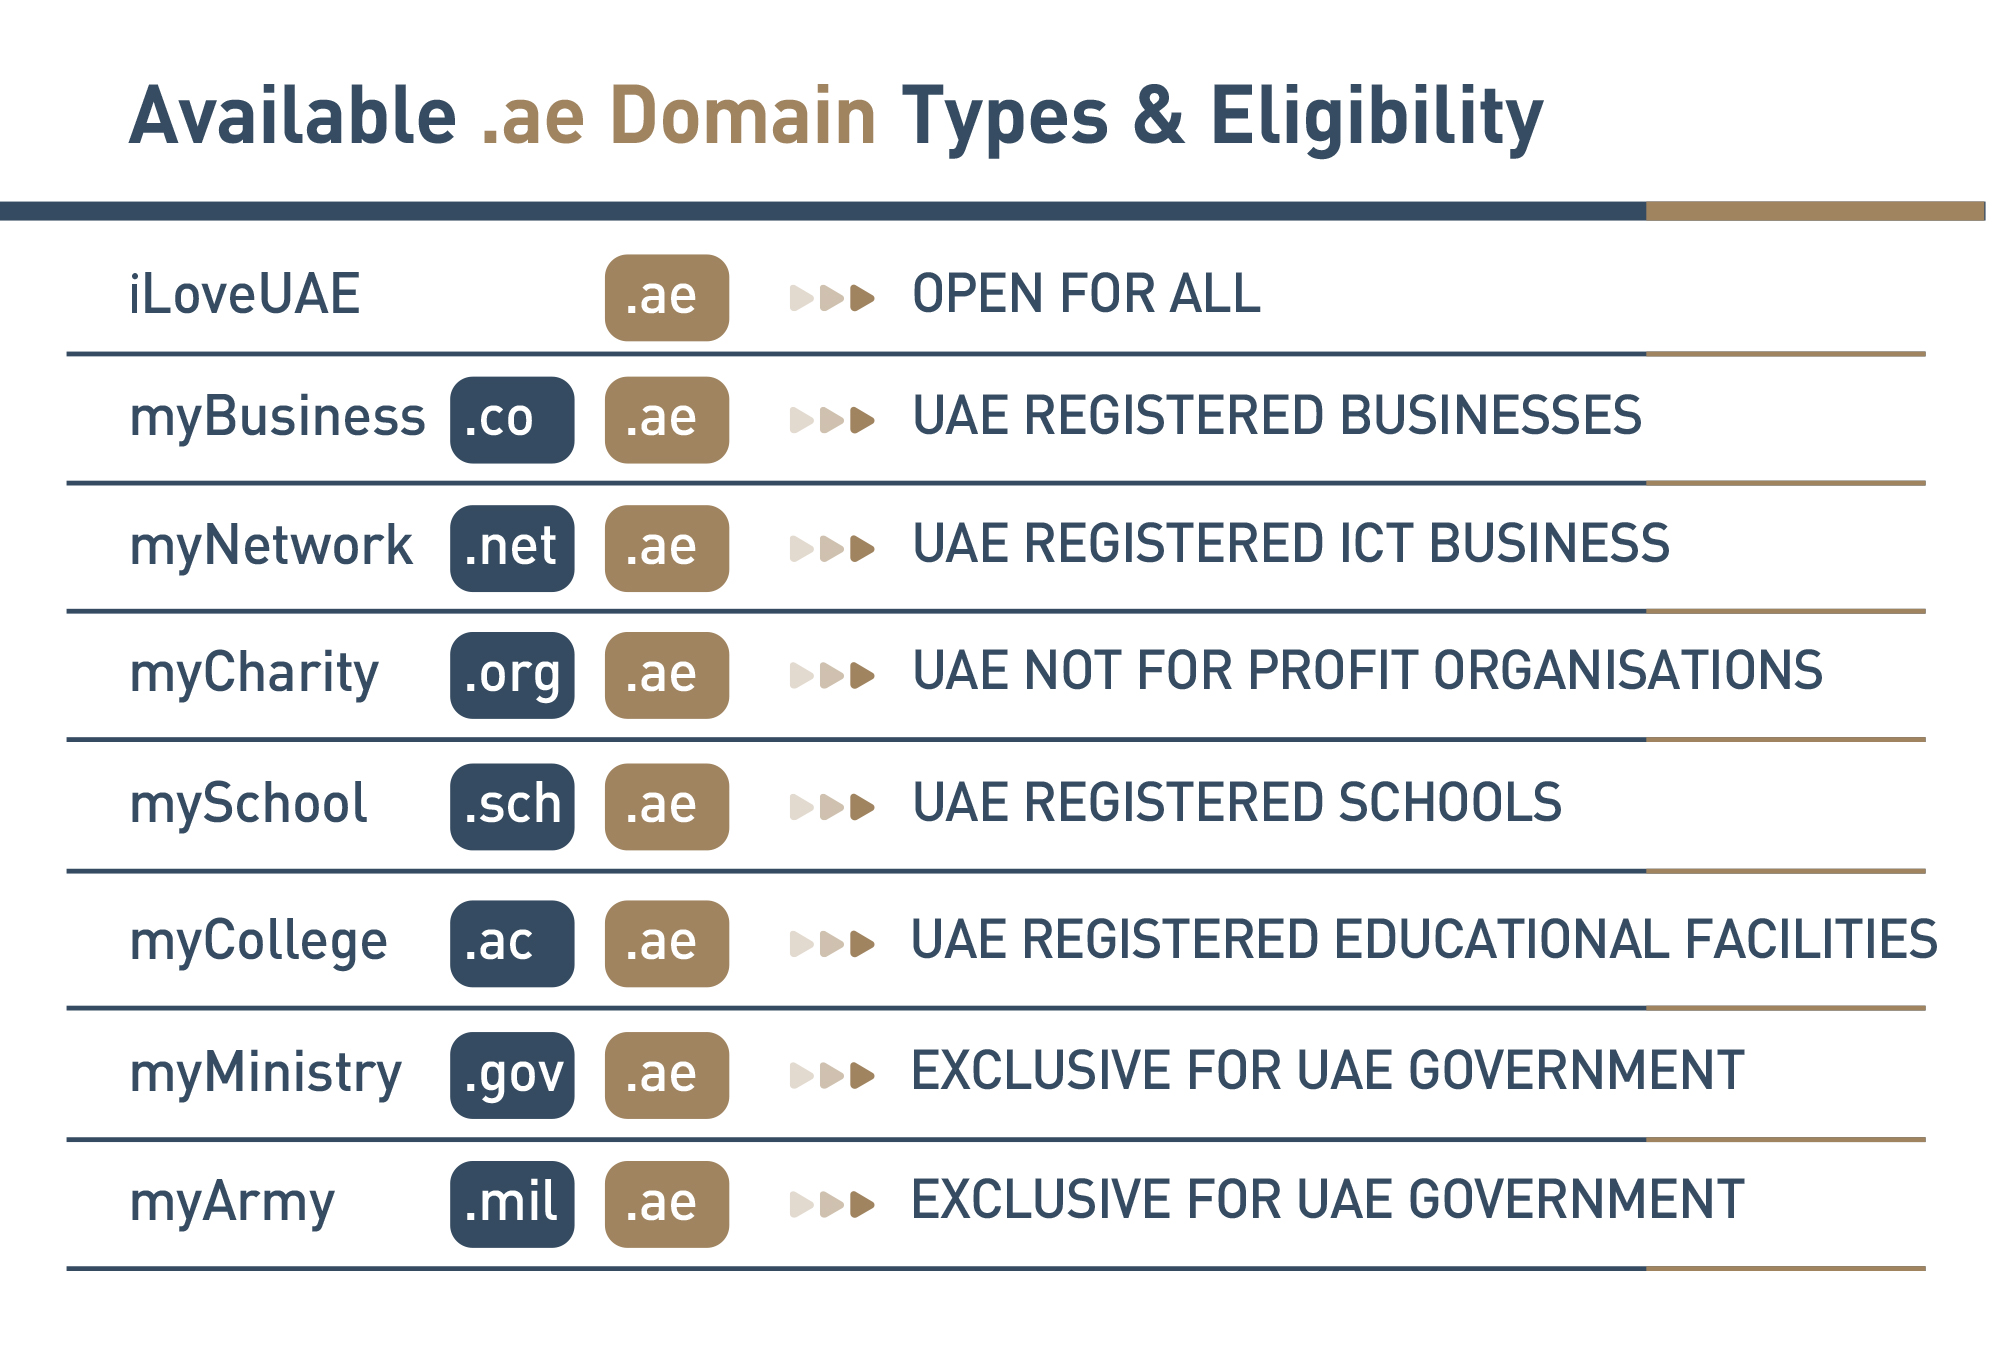 Available domain types